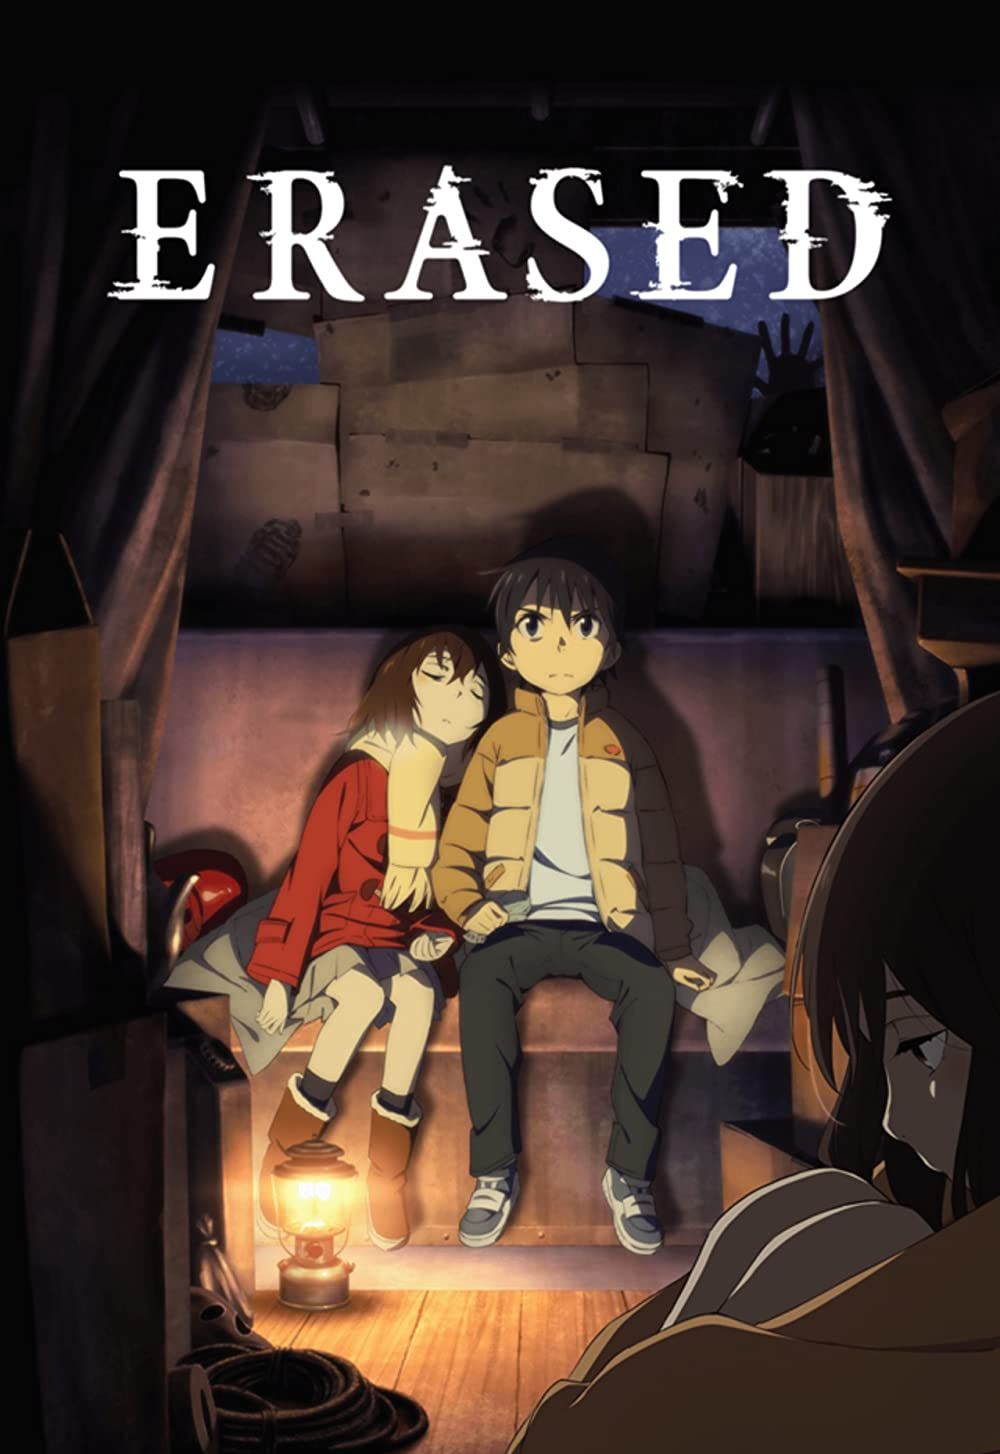 Satoru Fujinuma travels back in time to save his mother and childhood friends in Erased